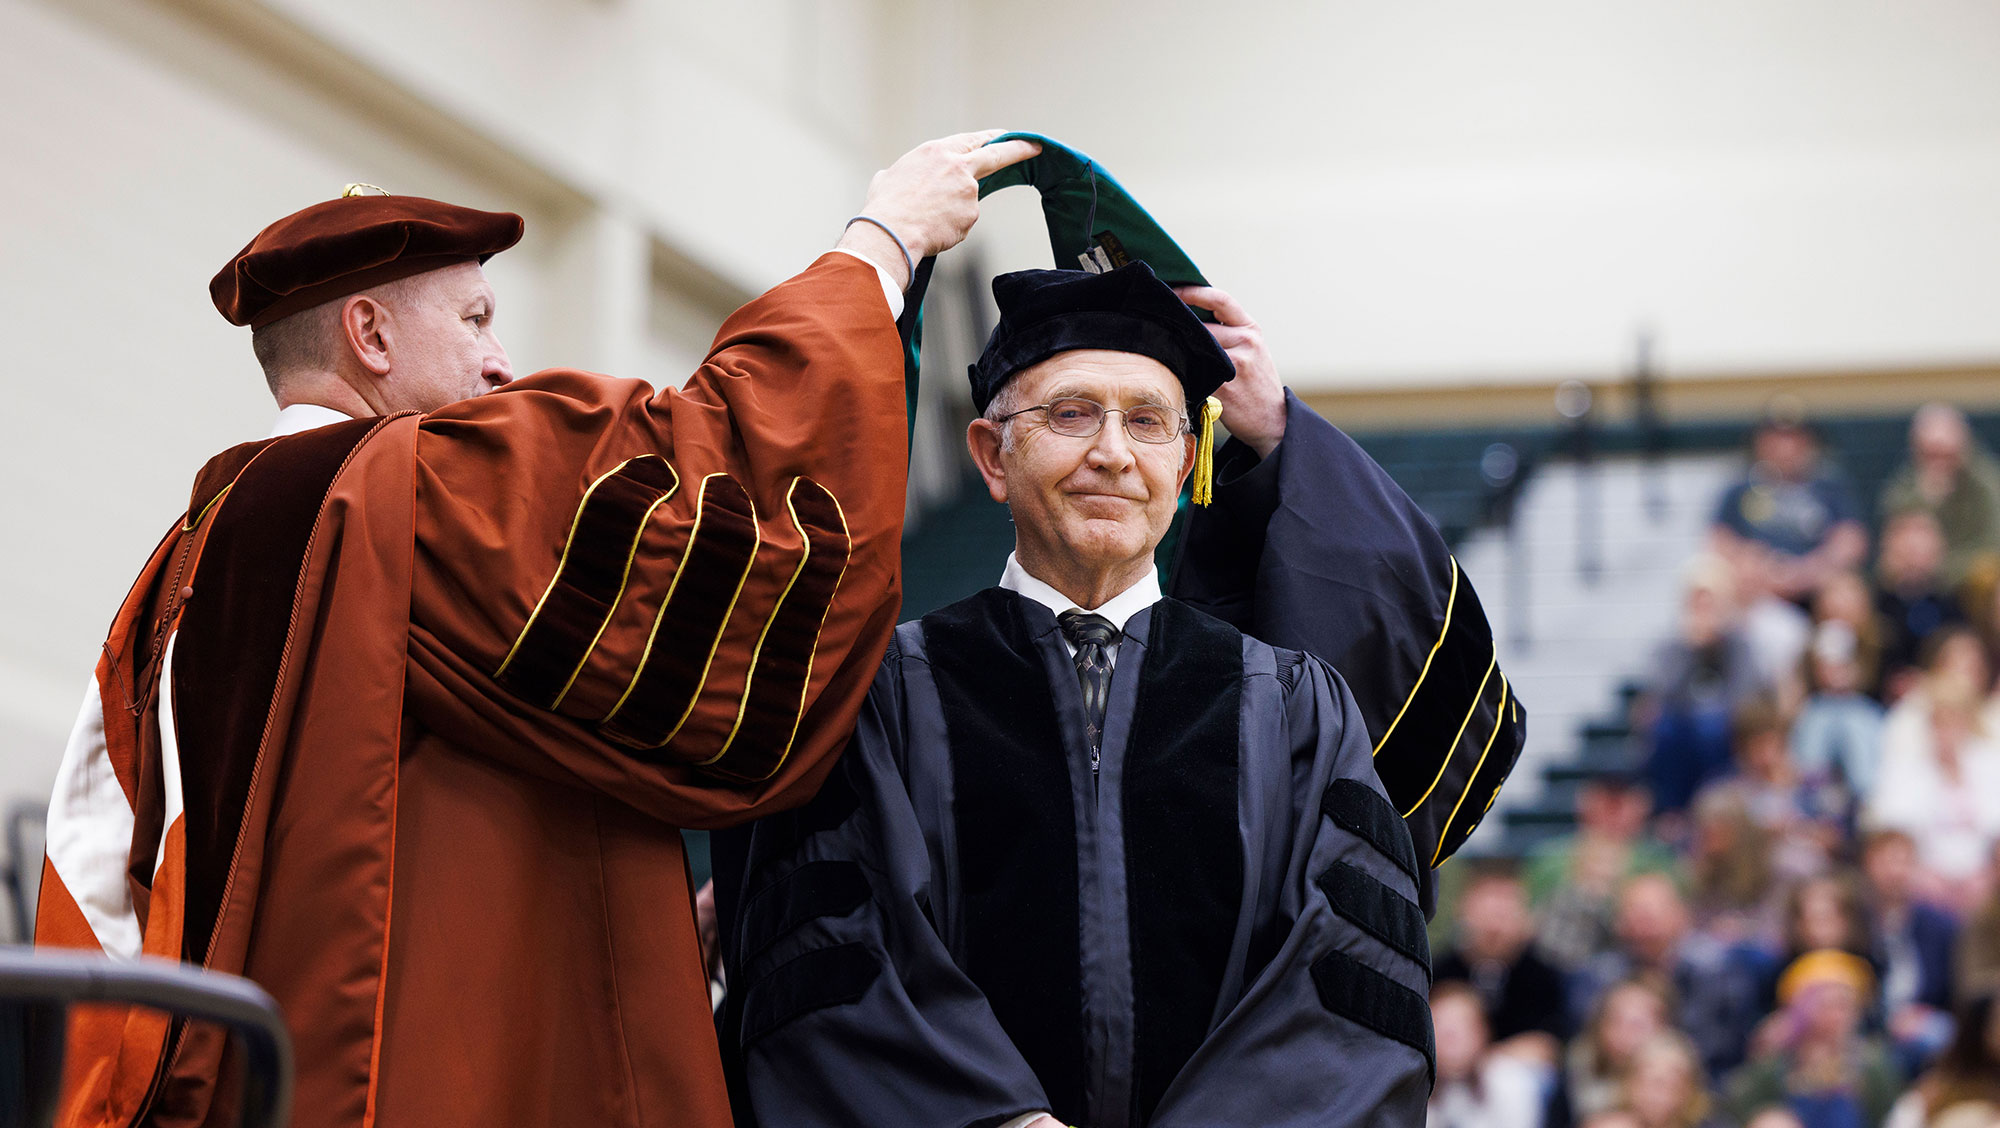 Jim D. Neiman receives his doctorate graduation hood after being presented with an honorary doctorate from app_-*@ Hills State University at the 187th Commencement Ceremony May 4.